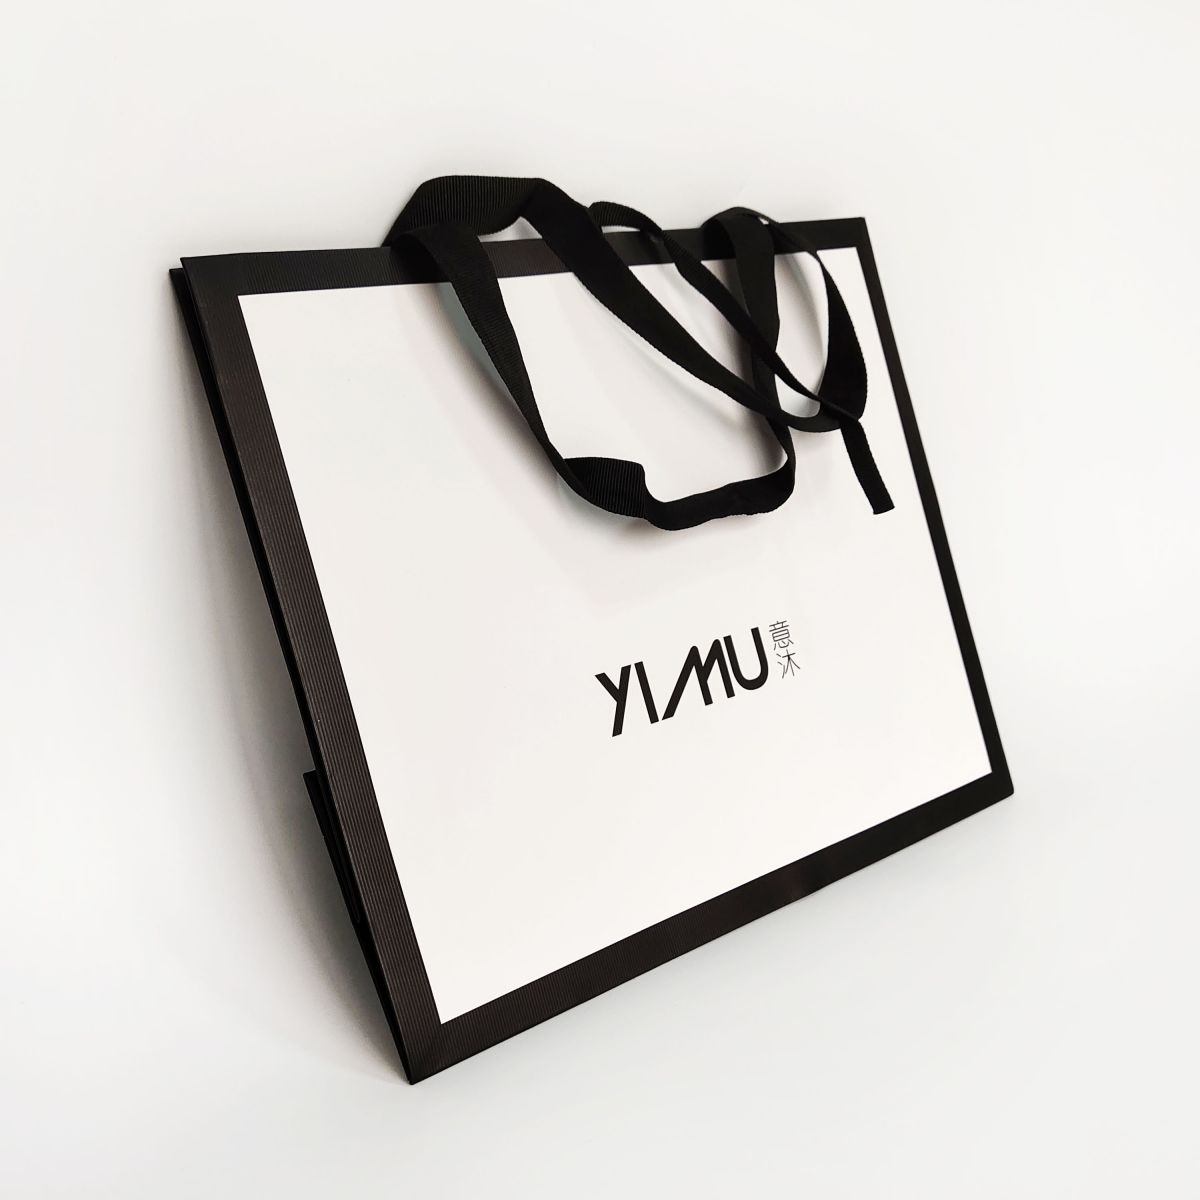 Large Custom Paper Shopping Bag with Company Logo